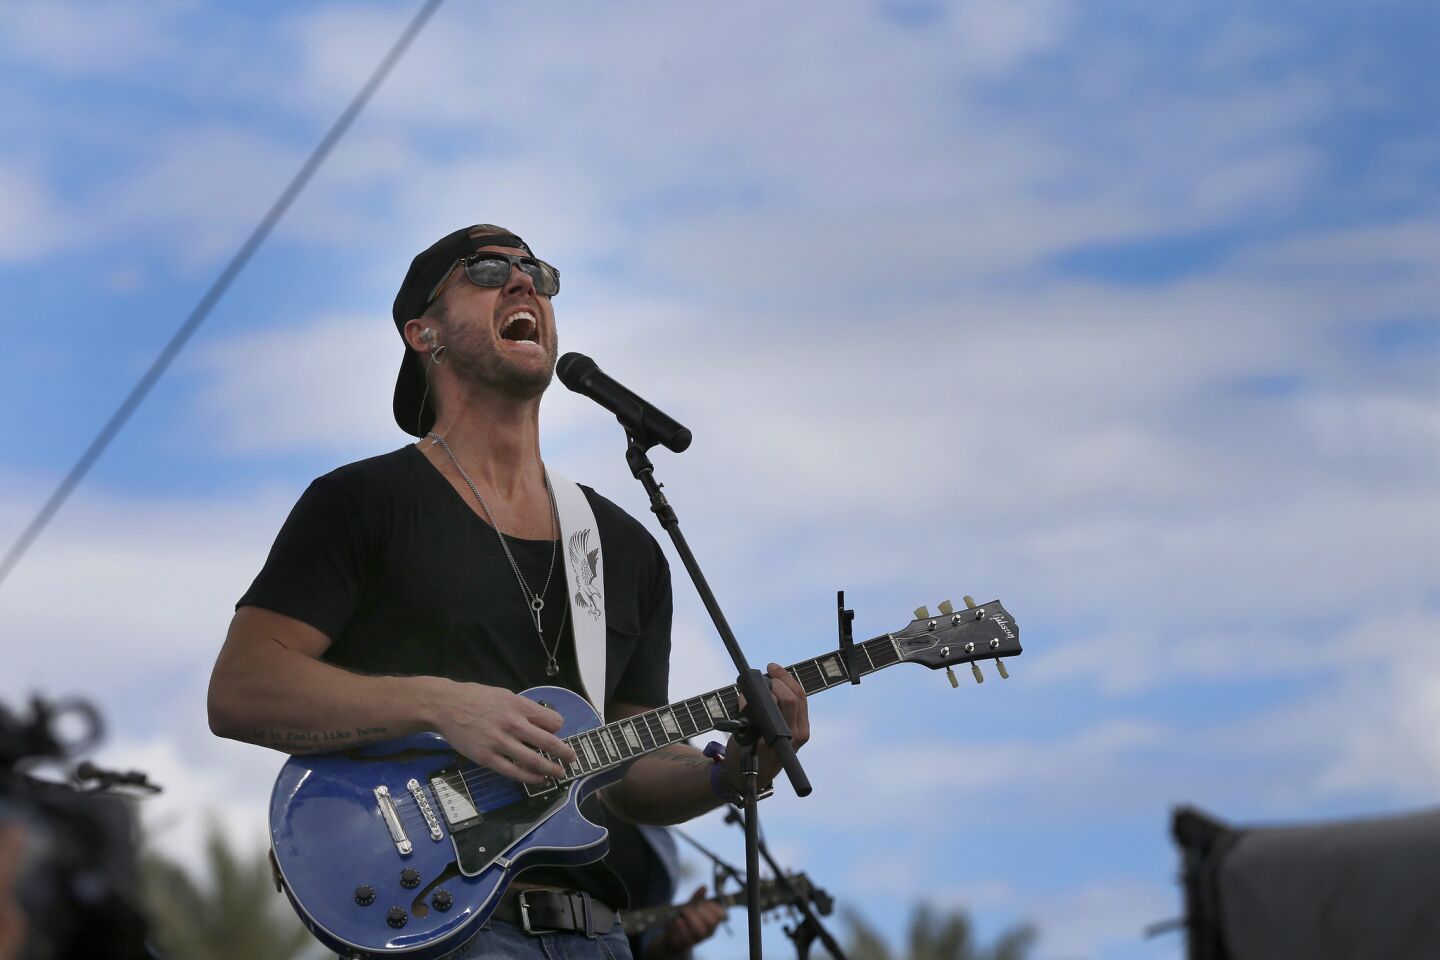 Brett Young performs on the Mane Stage during the second day of the 10th edition of Stagecoach Country Music Festival at the Empire Polo Club in Indio on April 30.